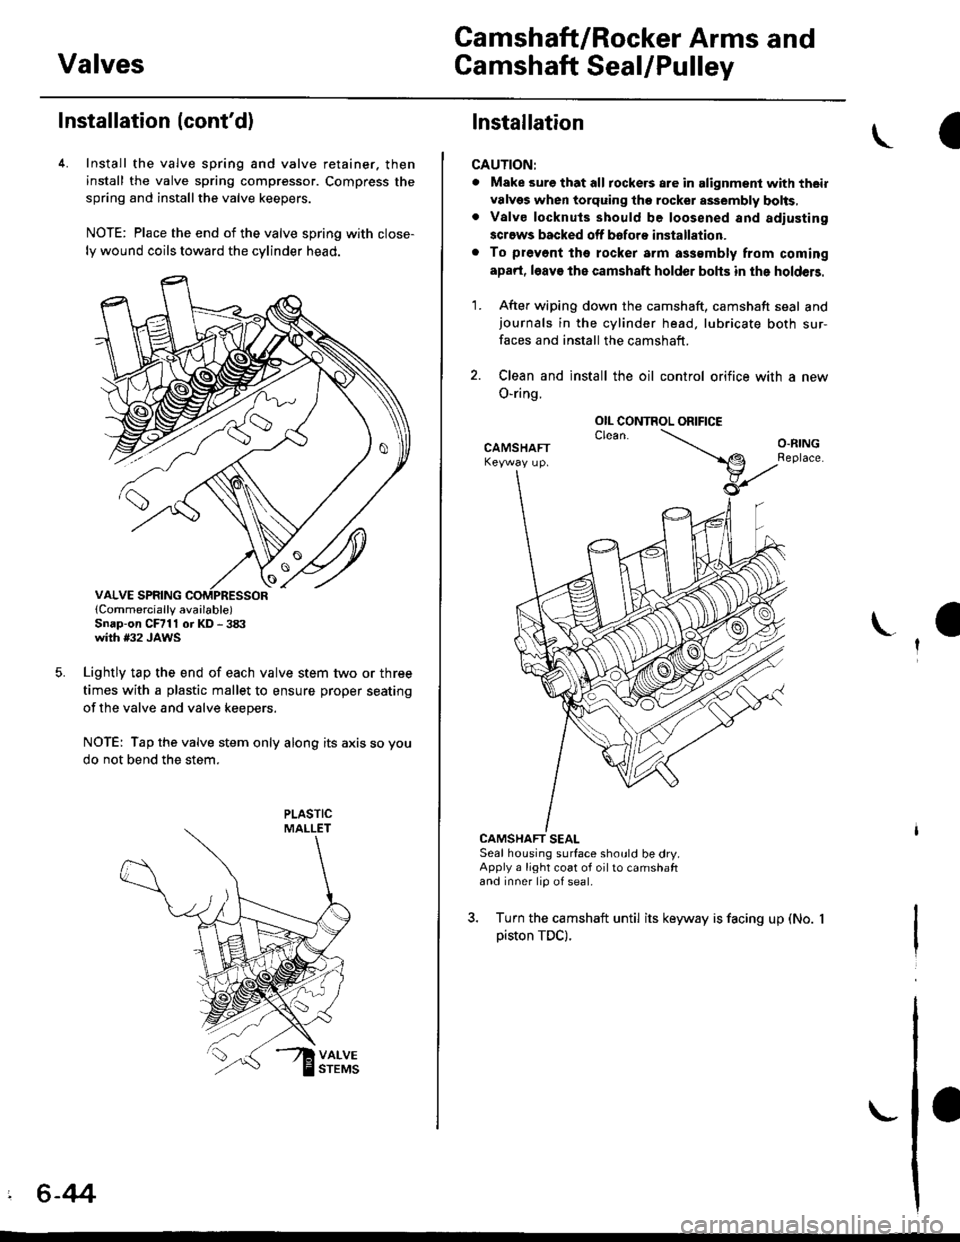 HONDA CIVIC 1998 6.G Service Manual Valves
Camshaft/Rocker Arms and
Camshaft Seal/Pulley
Installation (contd)
4. Install the valve spring and valve retainer. then
install the valve spring compressor. Compress the
spring and installthe 